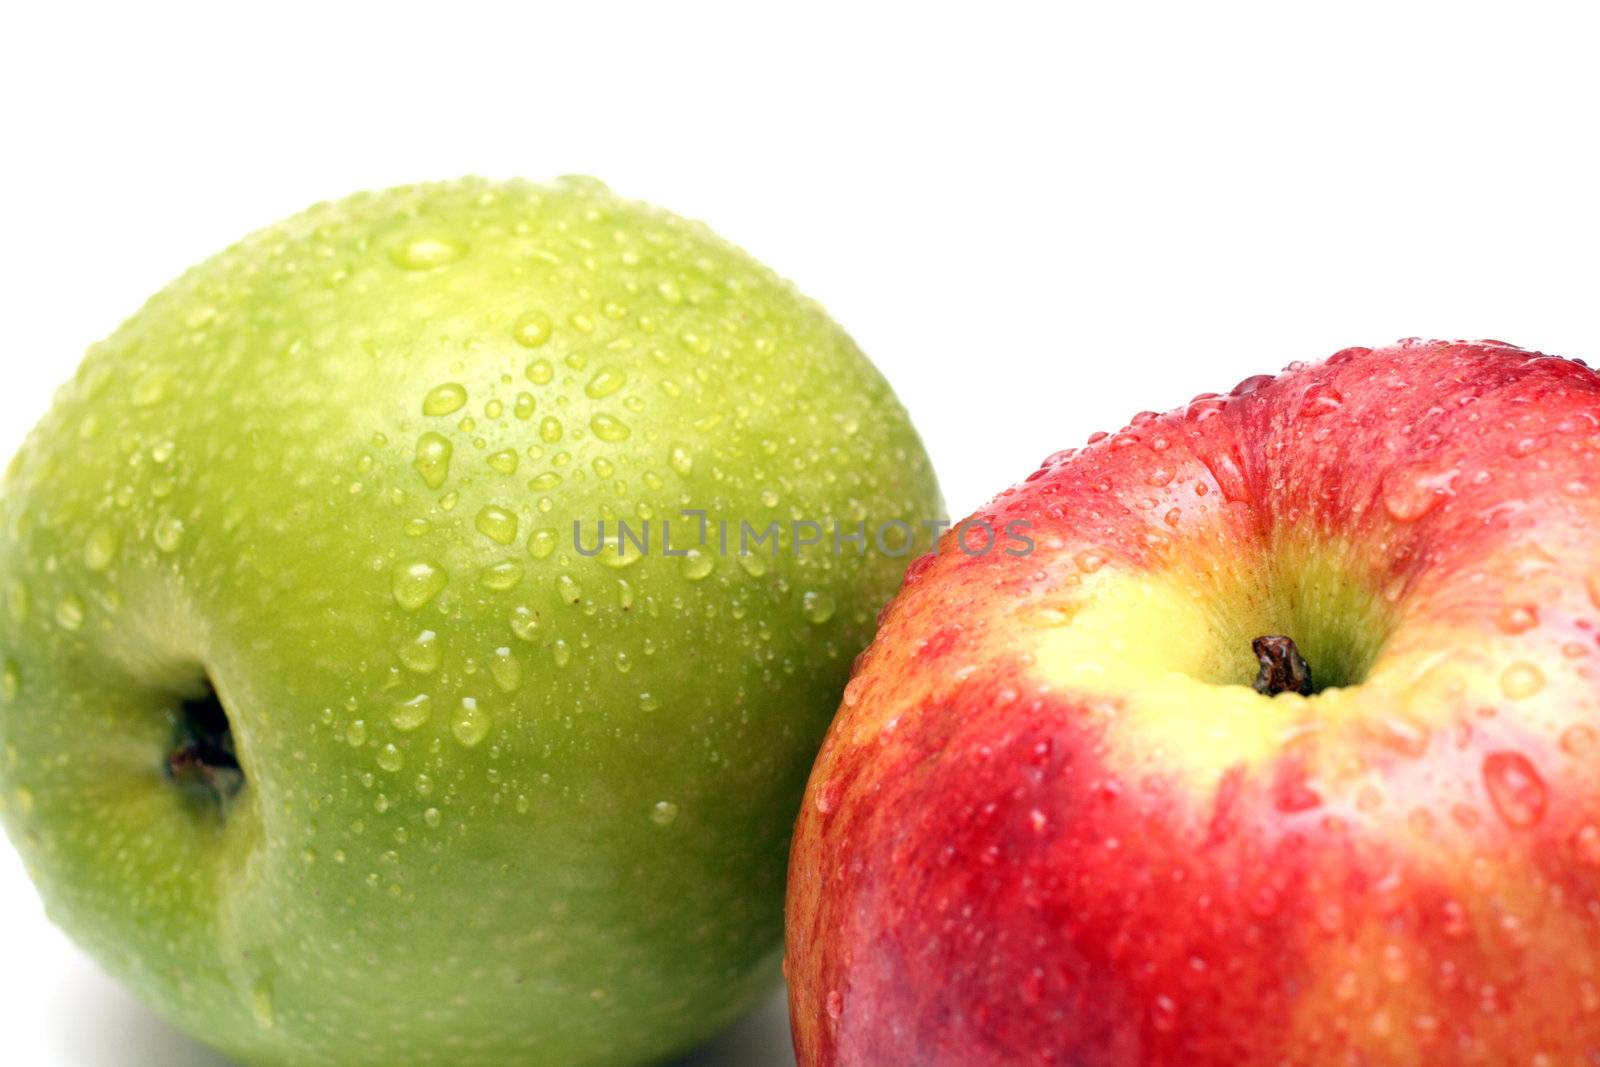 wet green and red apple fruits with water drops close-up